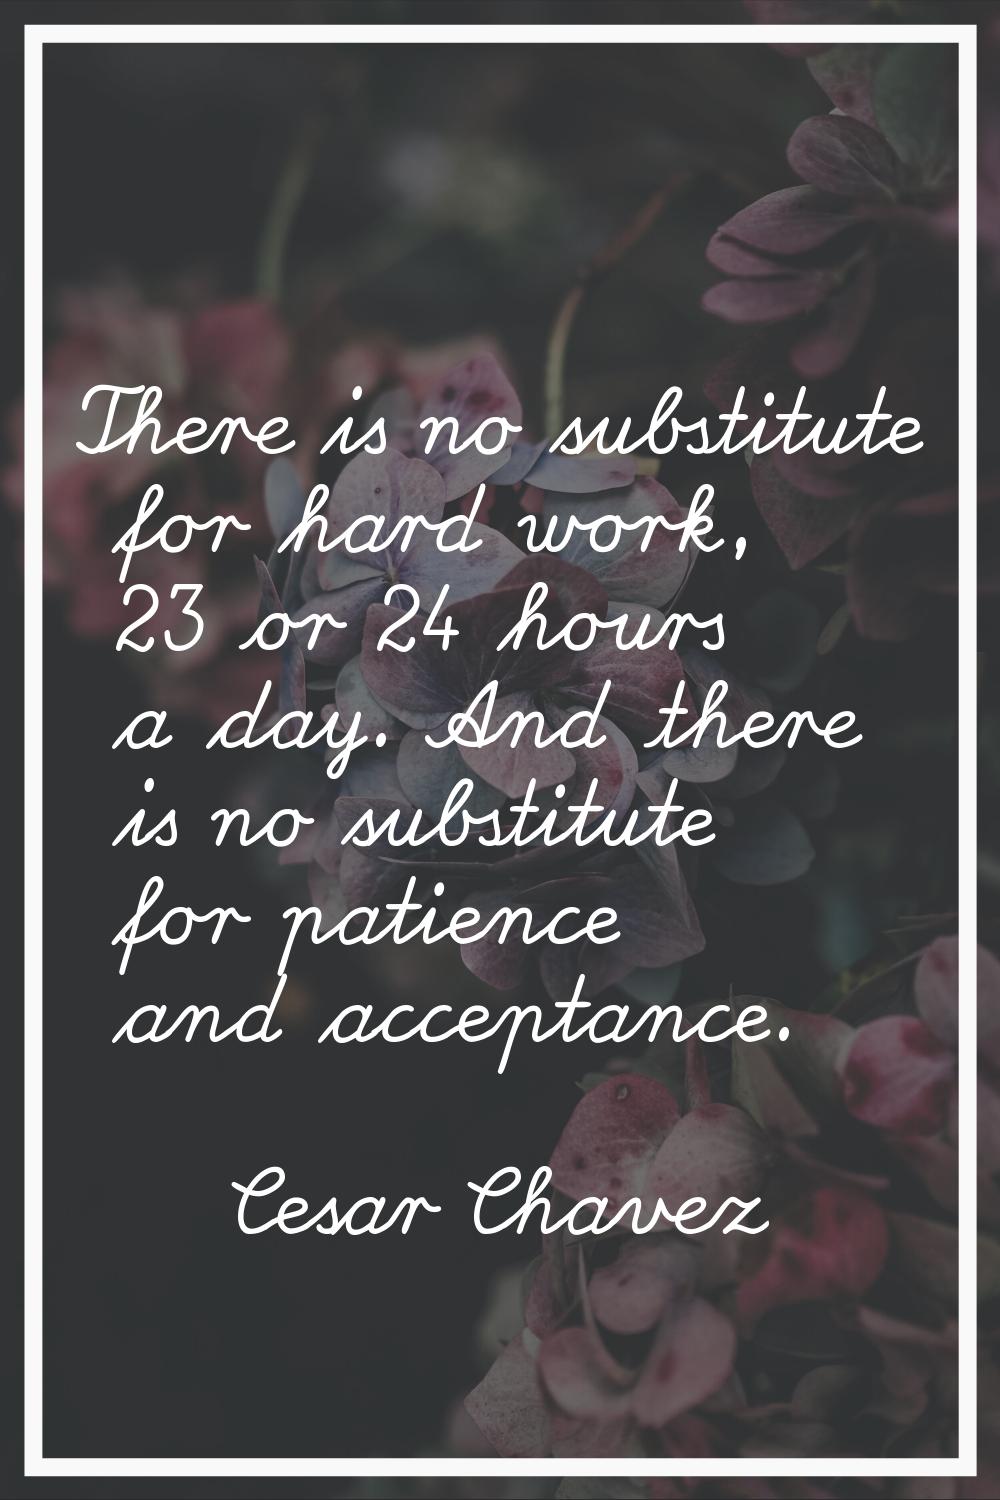 There is no substitute for hard work, 23 or 24 hours a day. And there is no substitute for patience